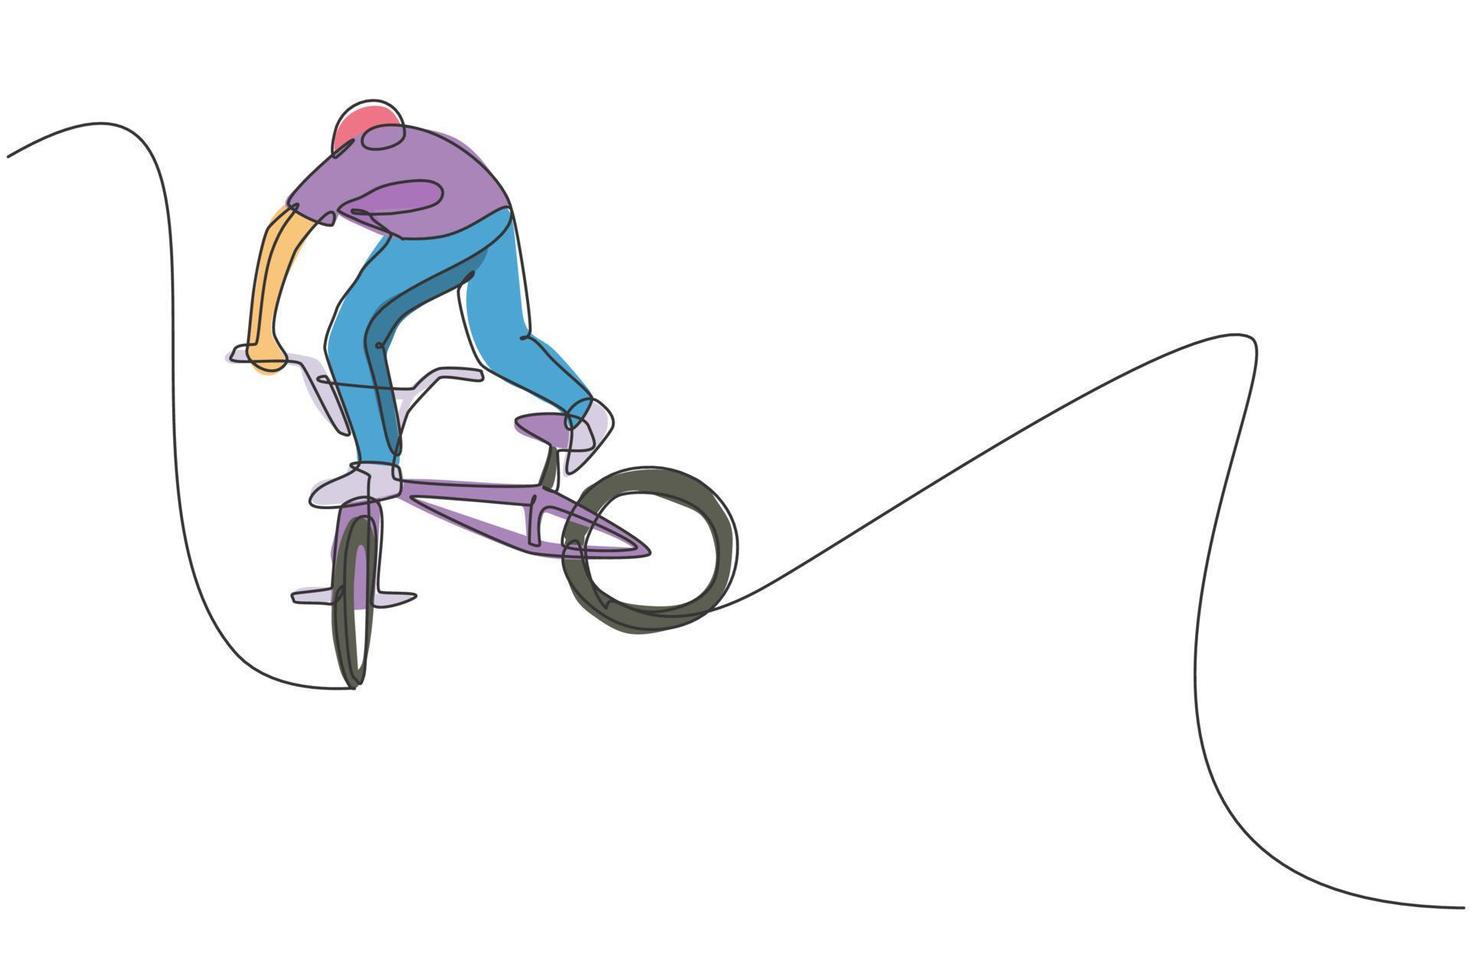 Single continuous line drawing of young BMX cycle rider show flying into the air trick in skatepark. BMX freestyle concept. One line draw design vector illustration for freestyle promotion art media